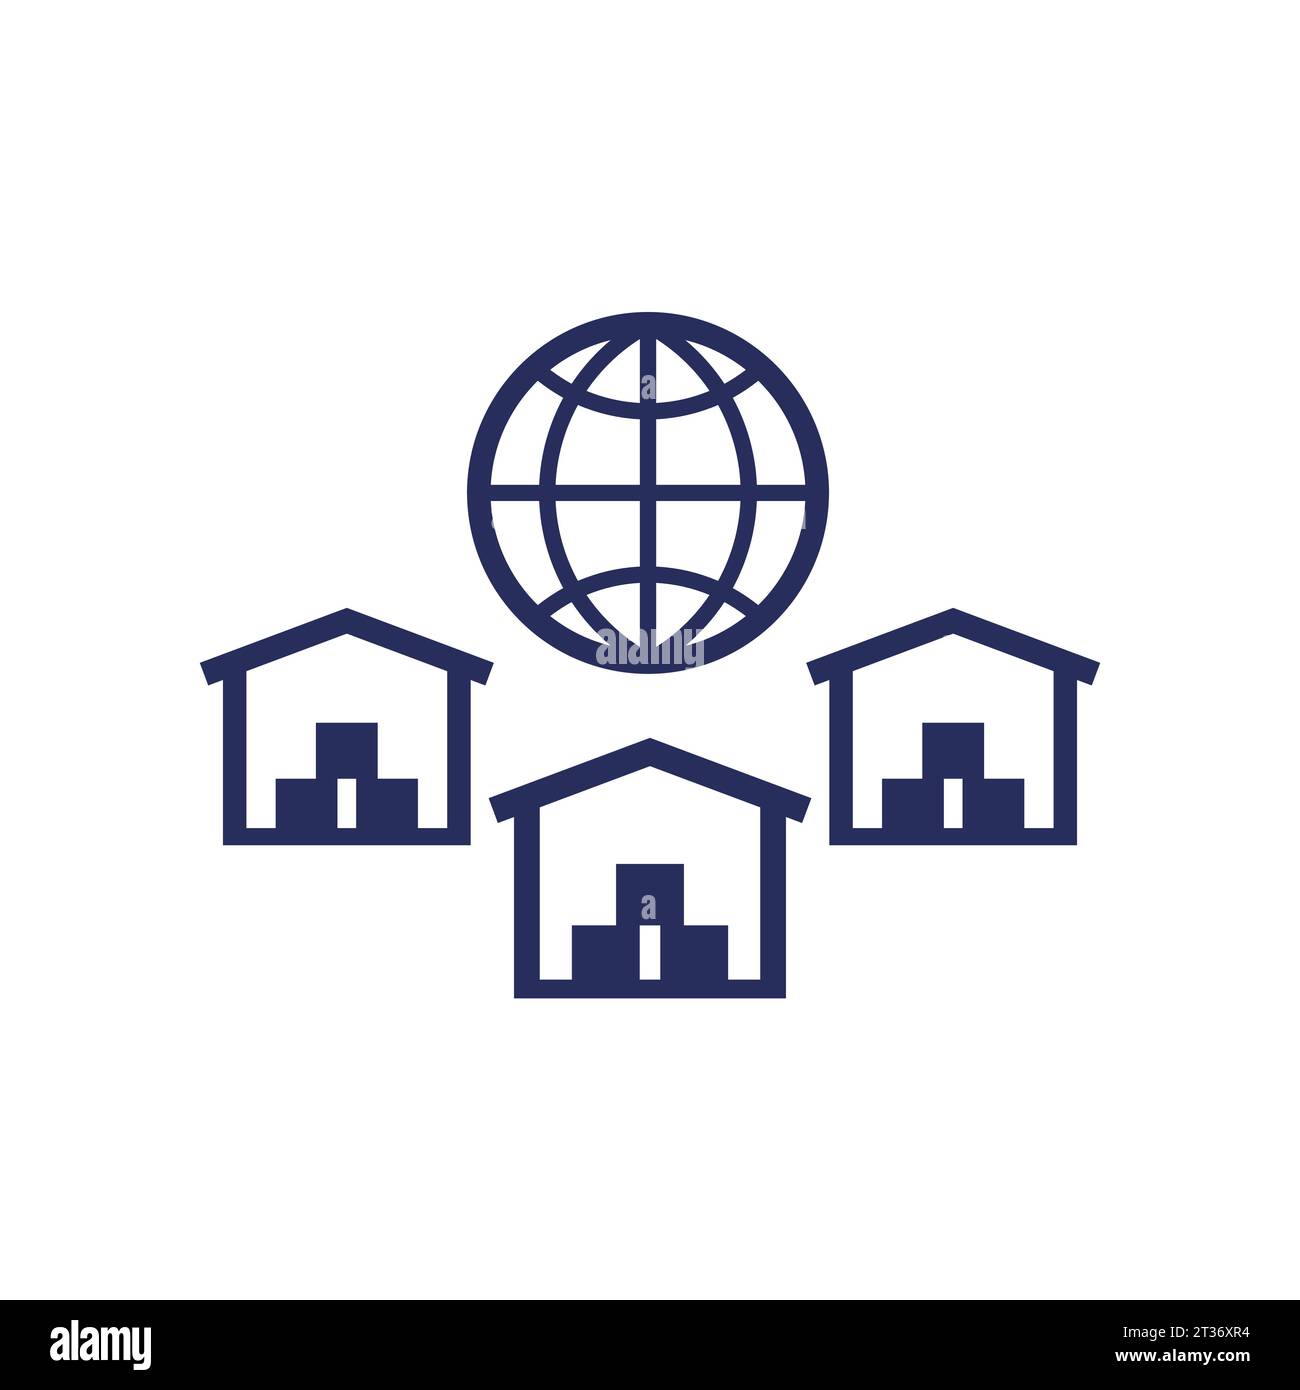 Global sourcing icon with warehouses Stock Vector